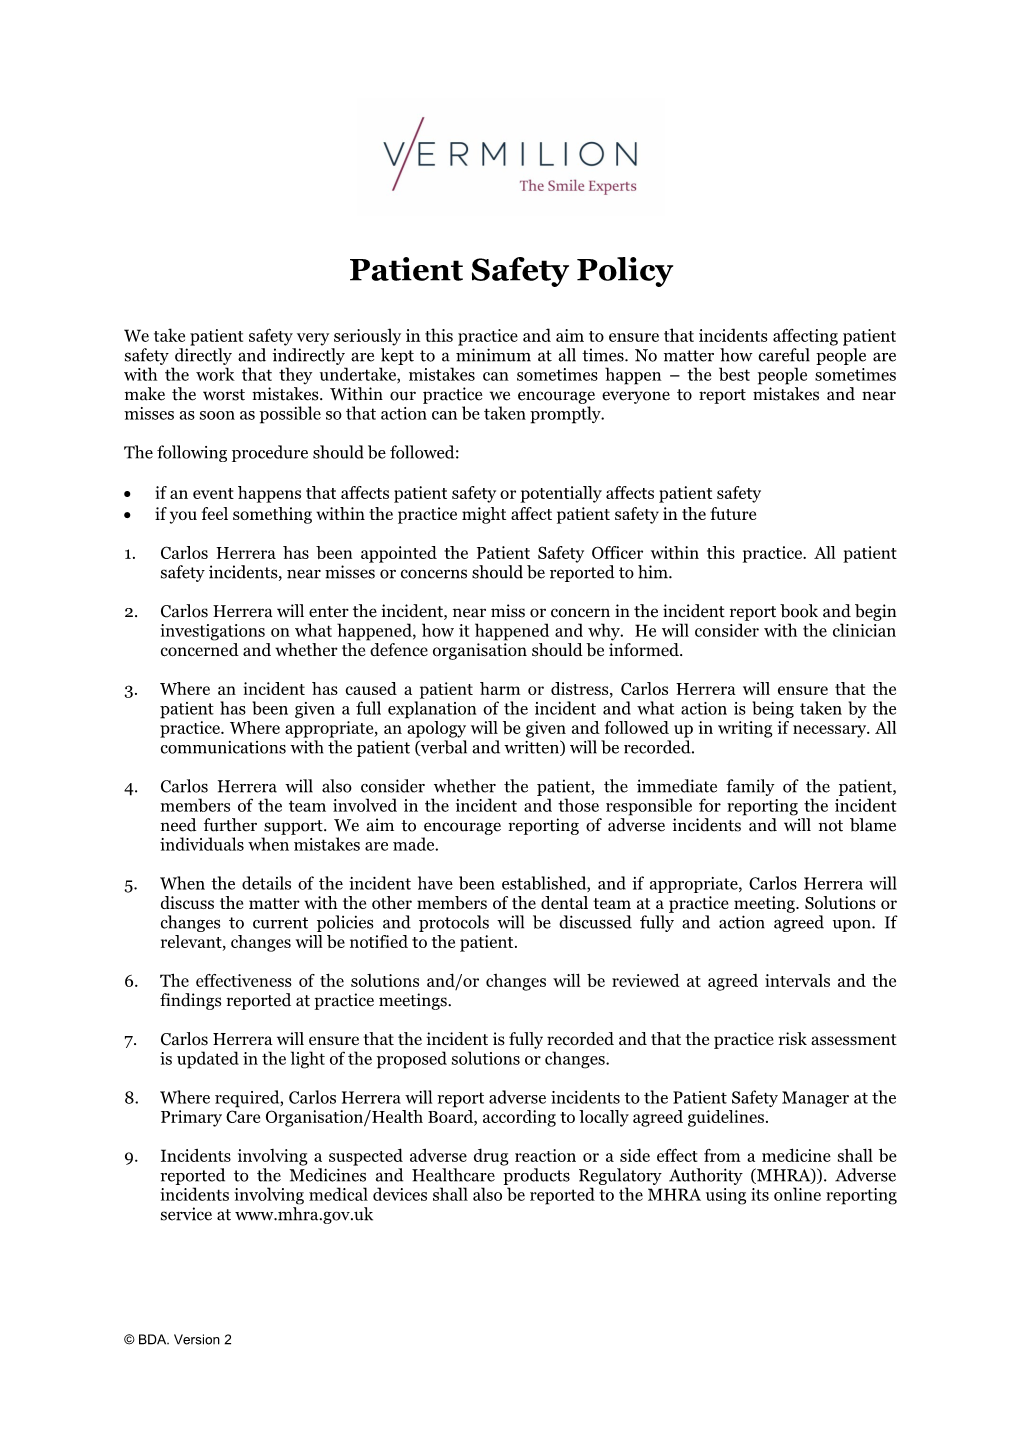 Model Policy for Patient Safety